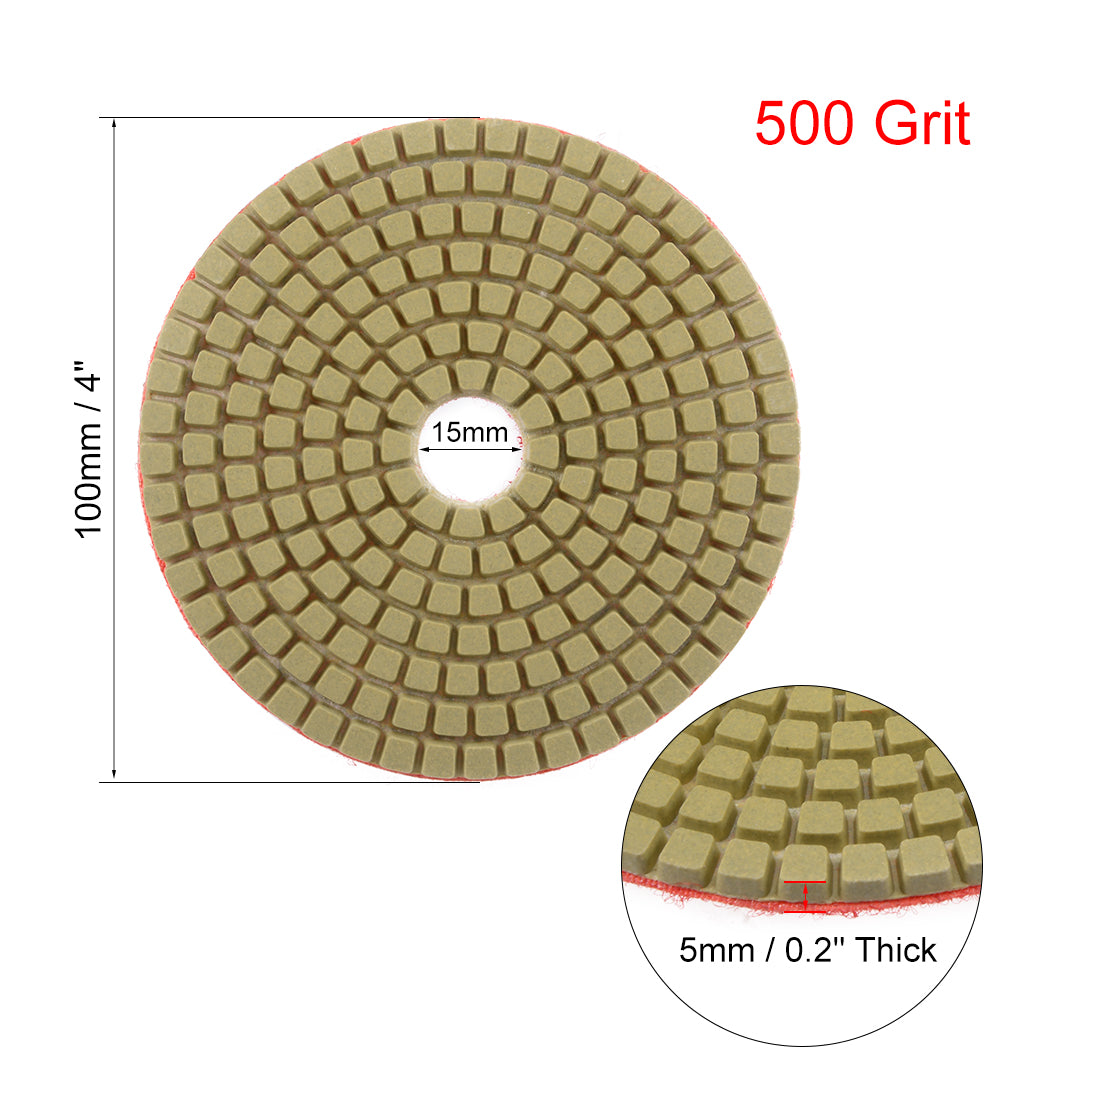 uxcell Uxcell Diamond Polishing Sanding Grinding Pads Discs 4 Inch Grit 500 10 Pcs for Granite Concrete Stone Marble